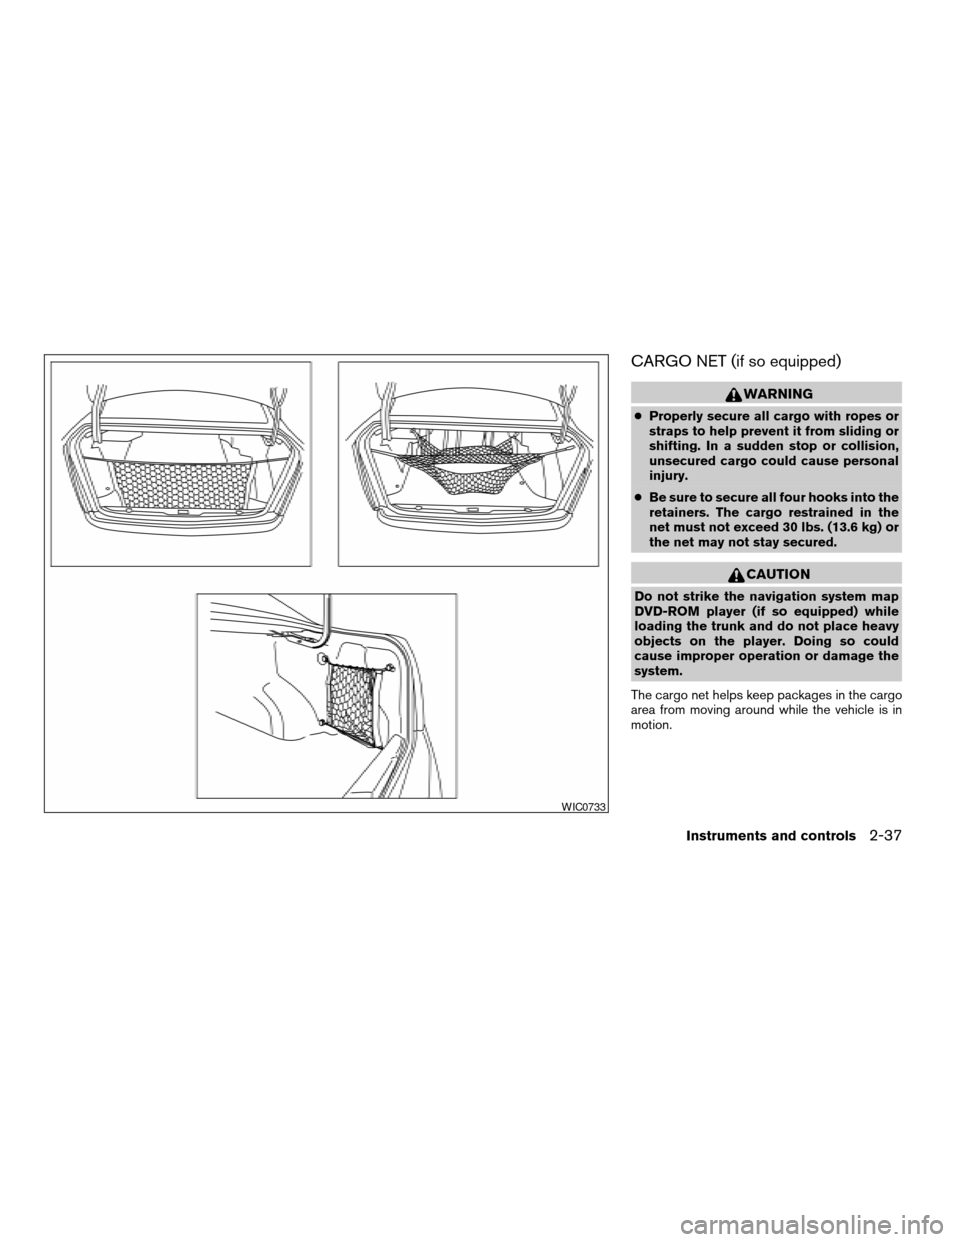 NISSAN ALTIMA 2006 L31 / 3.G Owners Manual CARGO NET (if so equipped)
WARNING
cProperly secure all cargo with ropes or
straps to help prevent it from sliding or
shifting. In a sudden stop or collision,
unsecured cargo could cause personal
inju